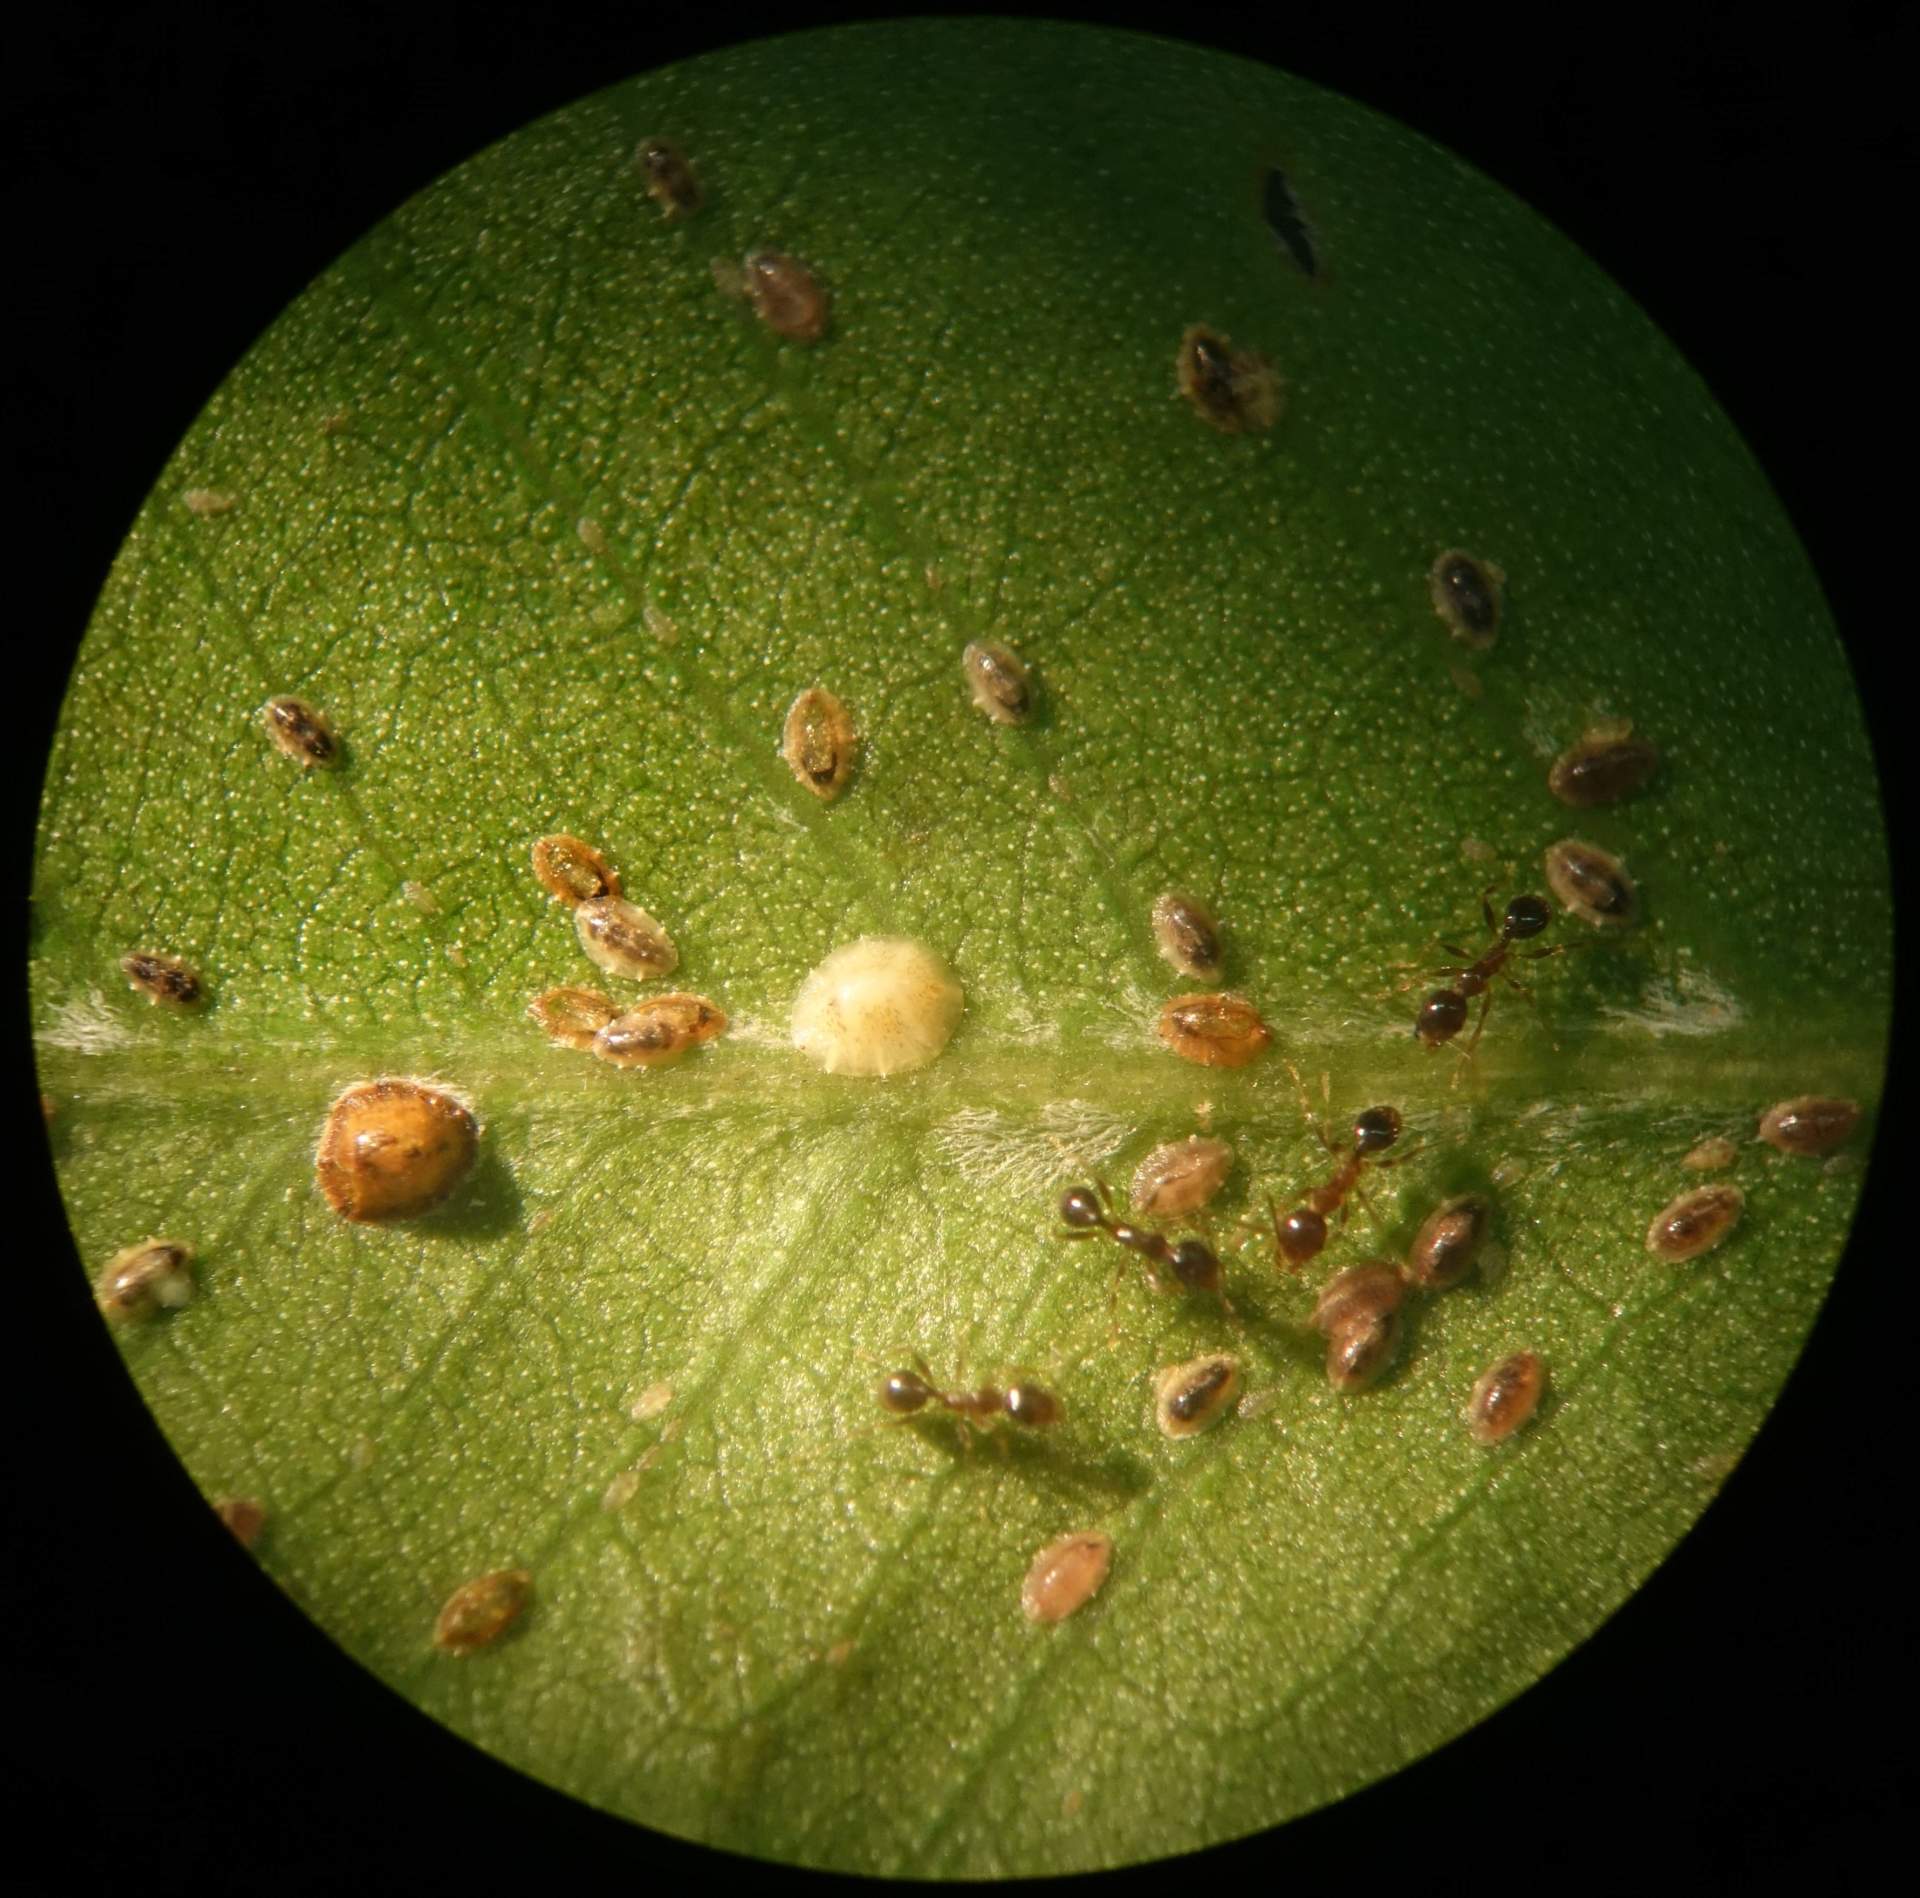 Ants and scale insects on a leaf